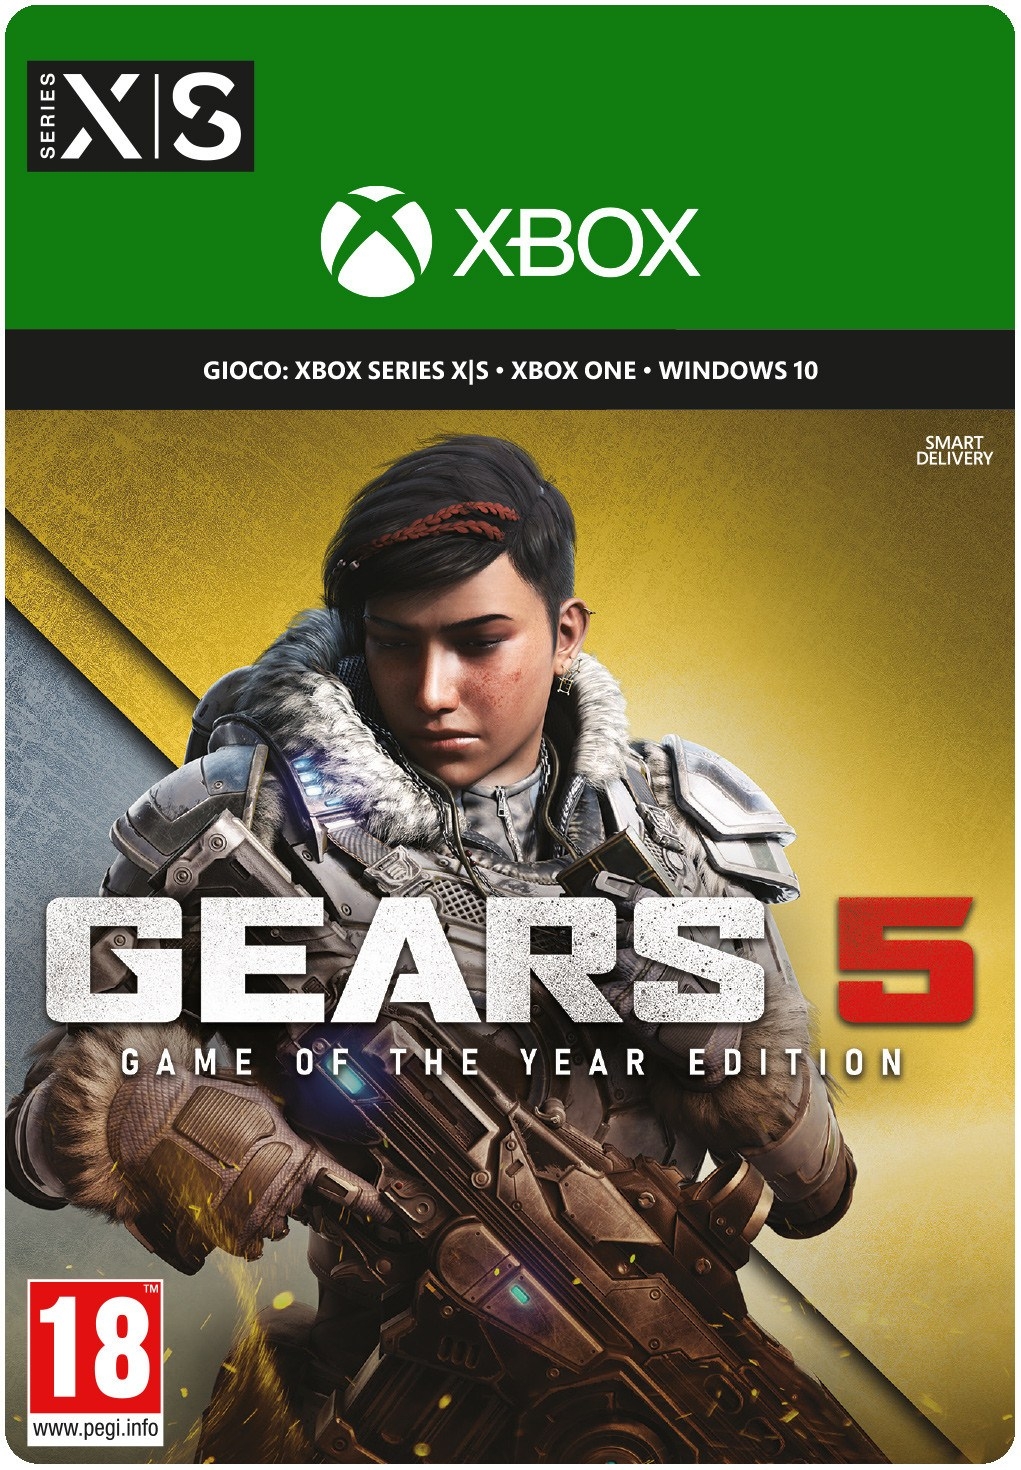 xbox game studios gears 5 - game of the year edition (compatibile con xbox series x)